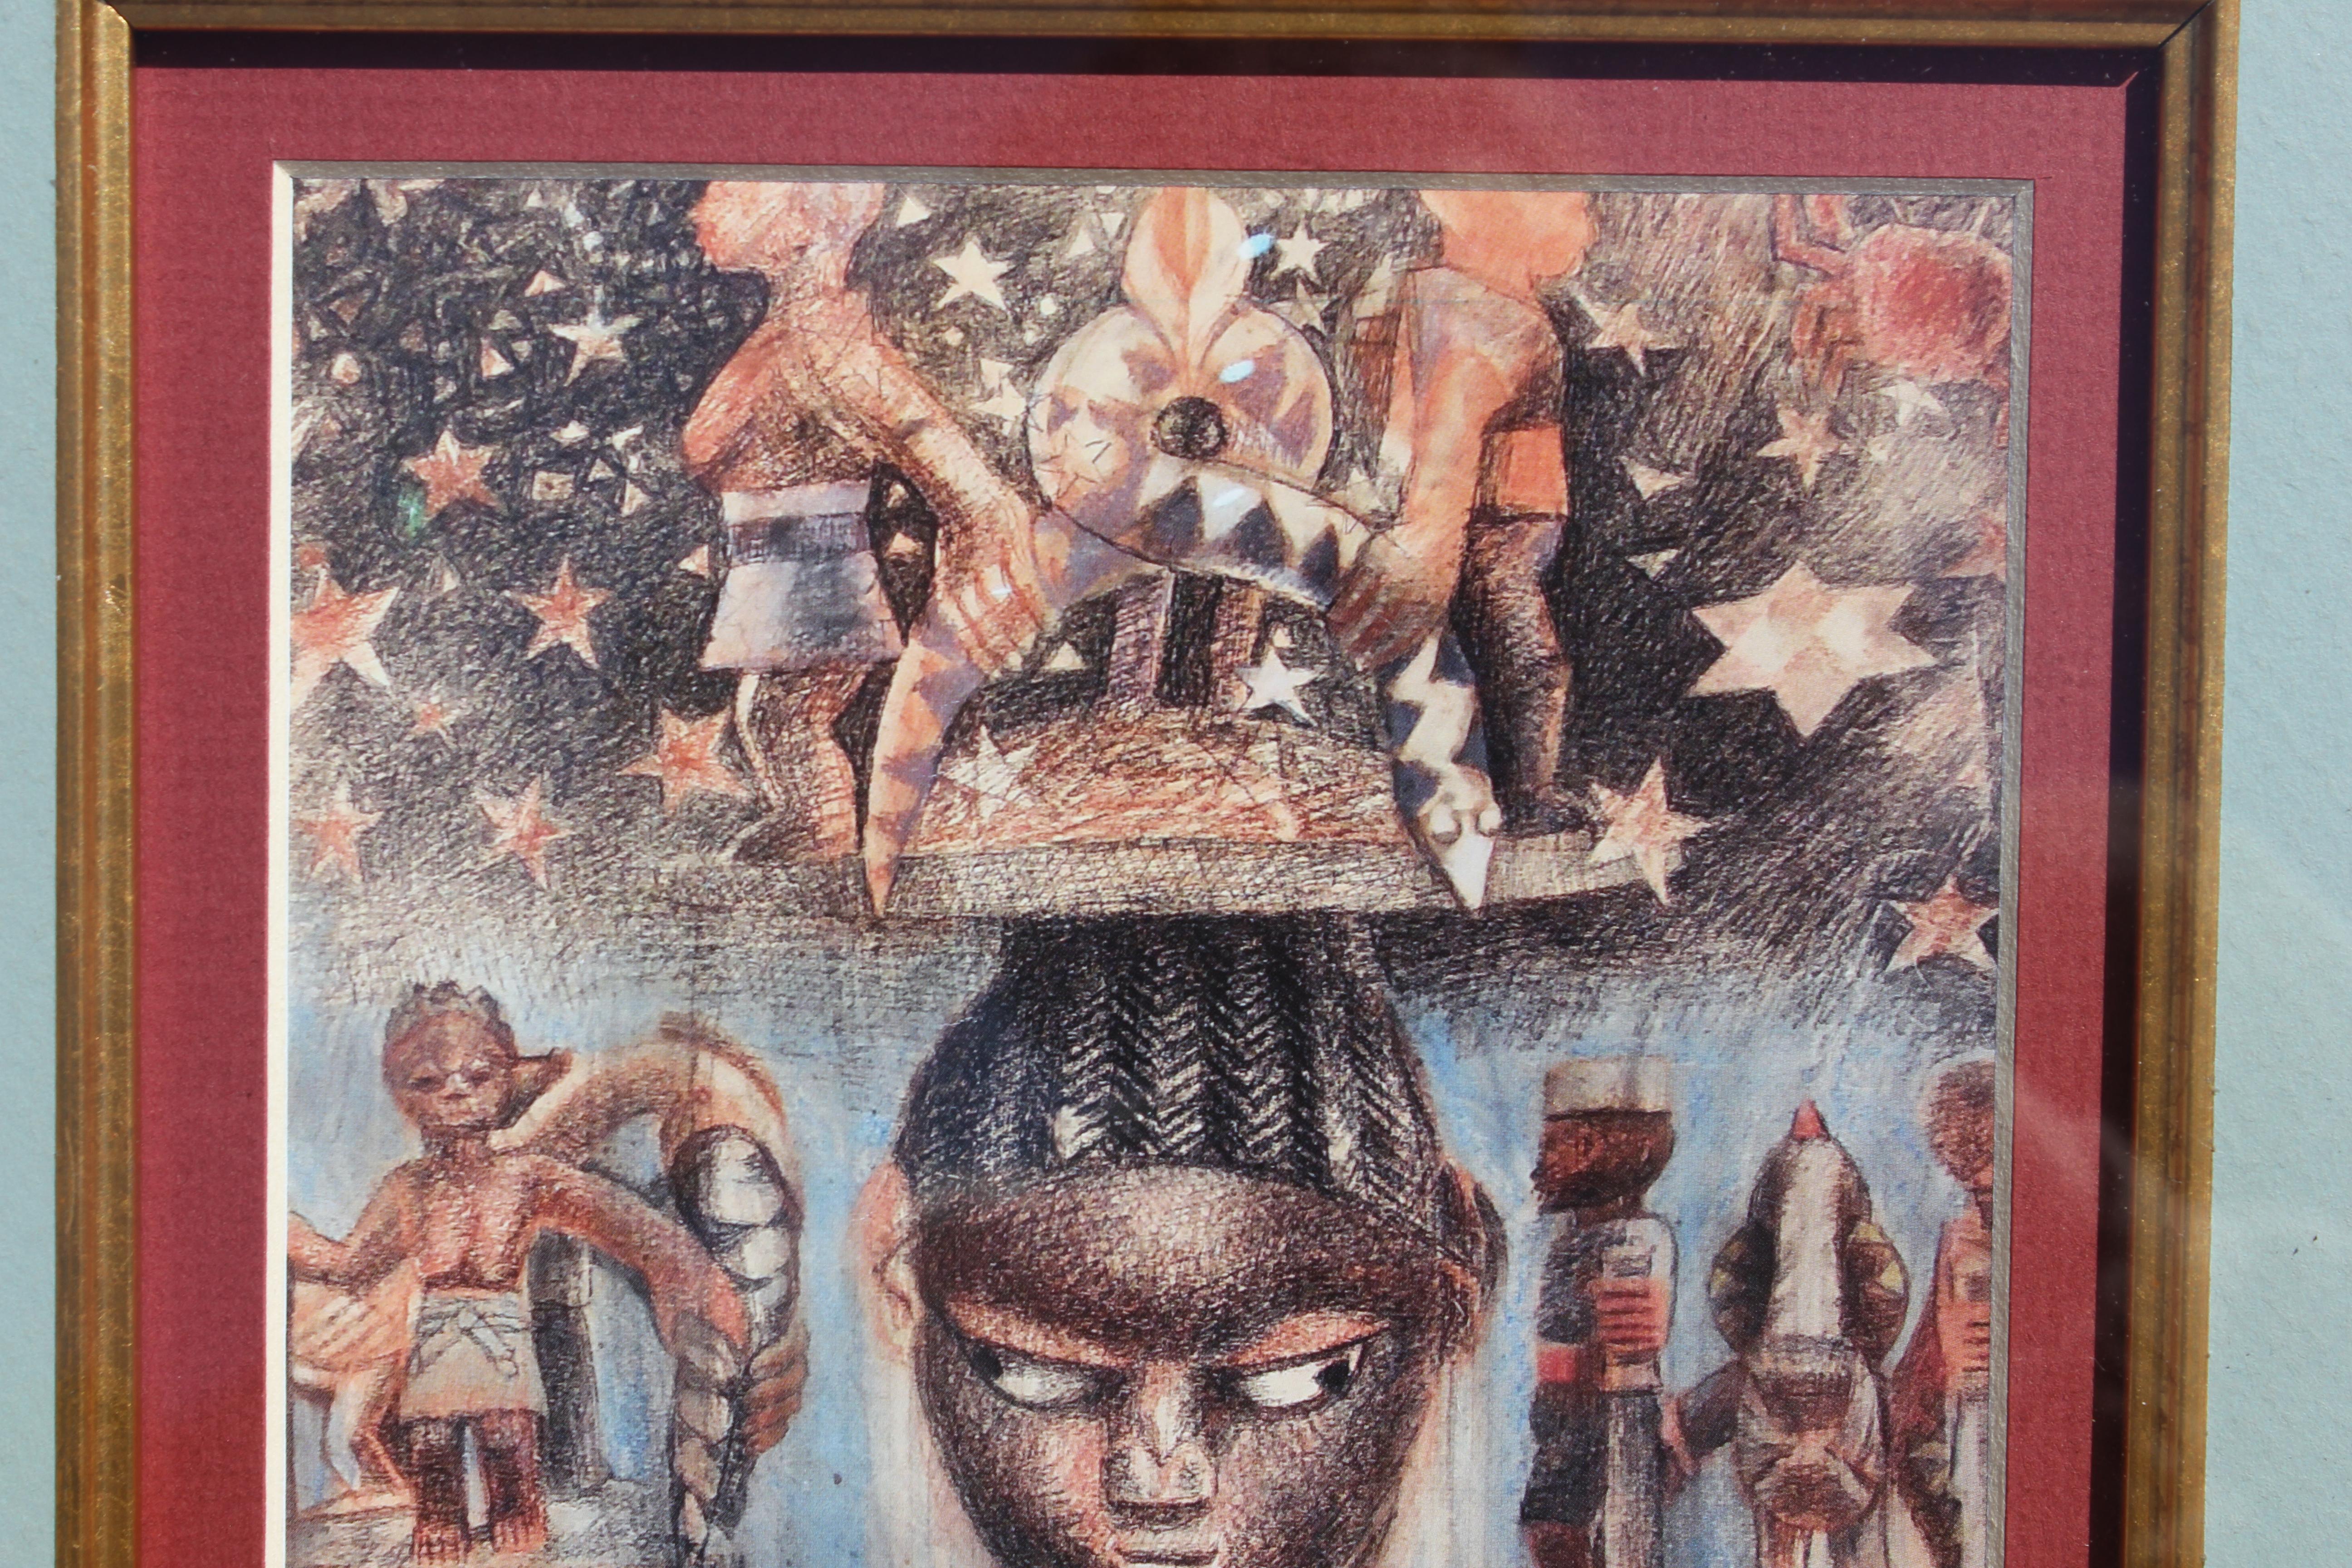 Surrealist Print with an African Imagery  - Brown Abstract Print by John Thomas Biggers